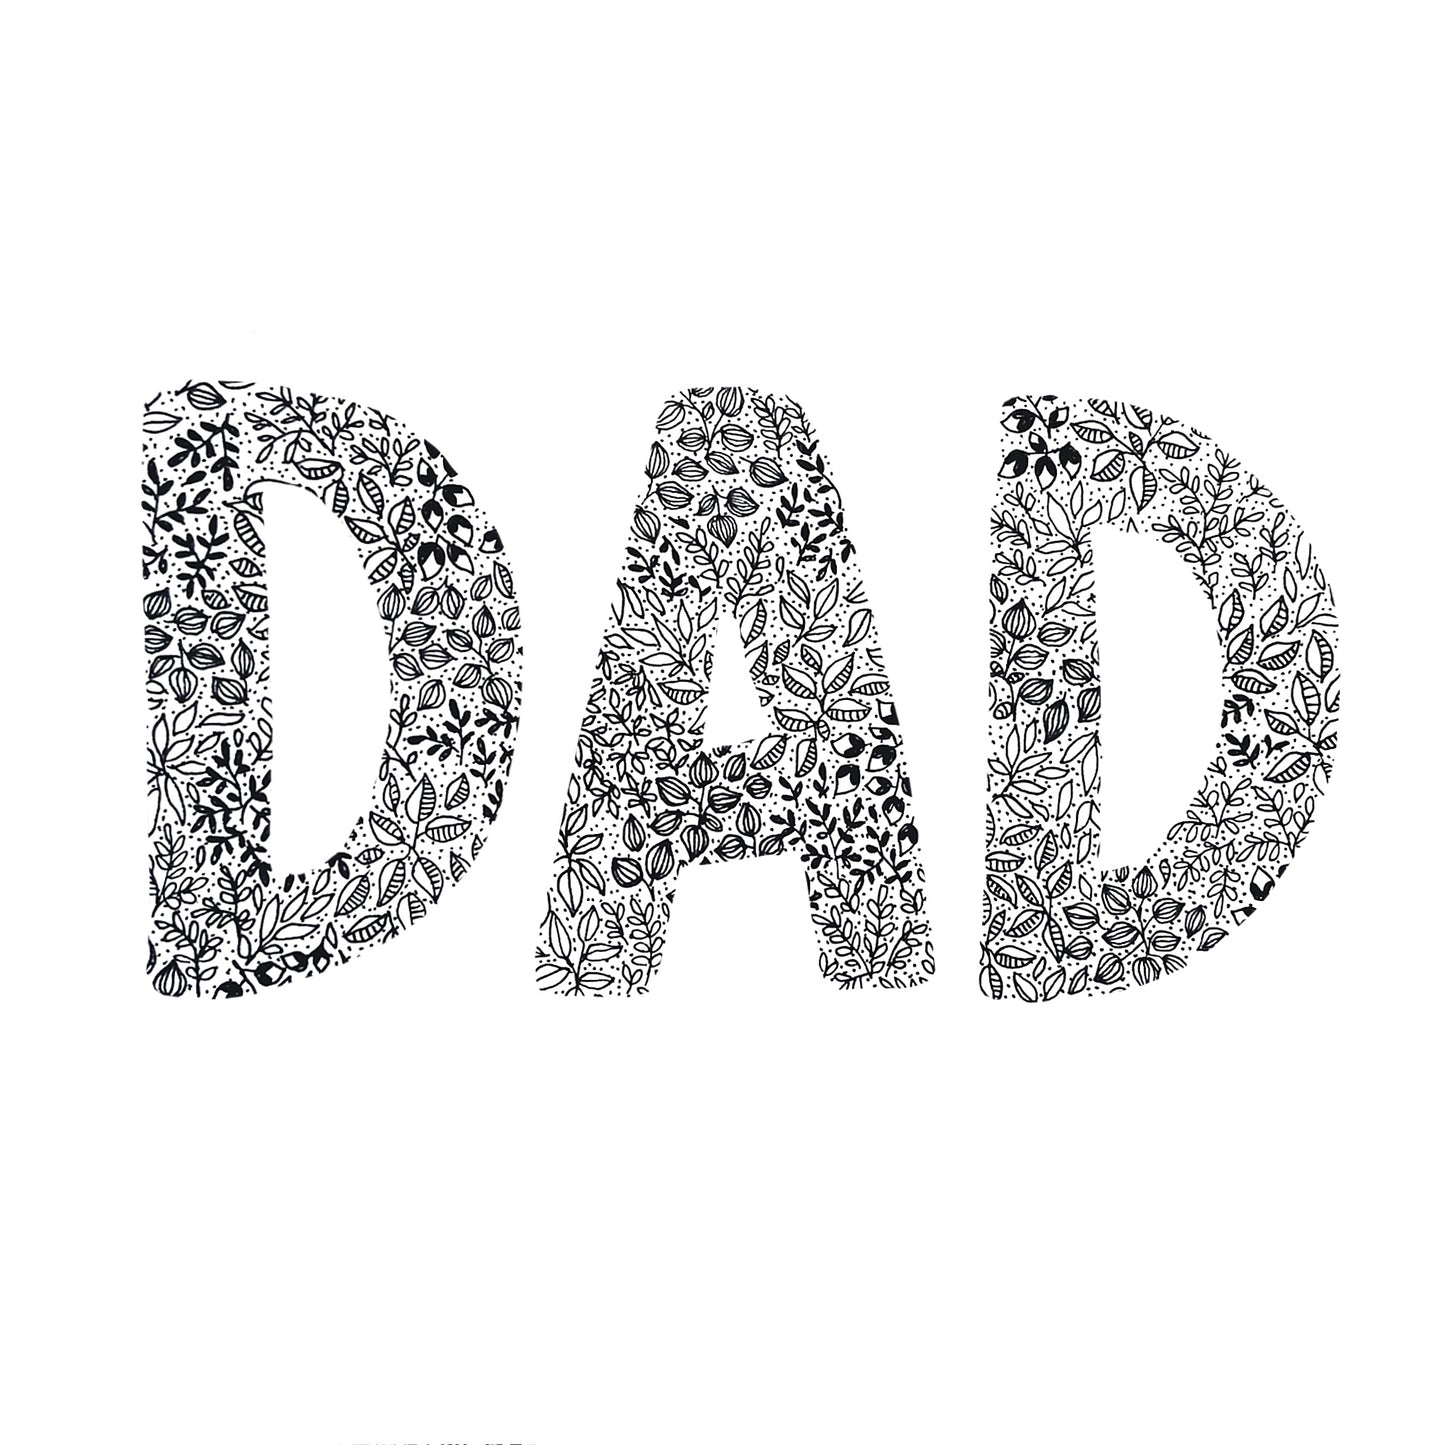 Image shows plain background image with the word DAD drawn from a variety of black and white floral drawings. 